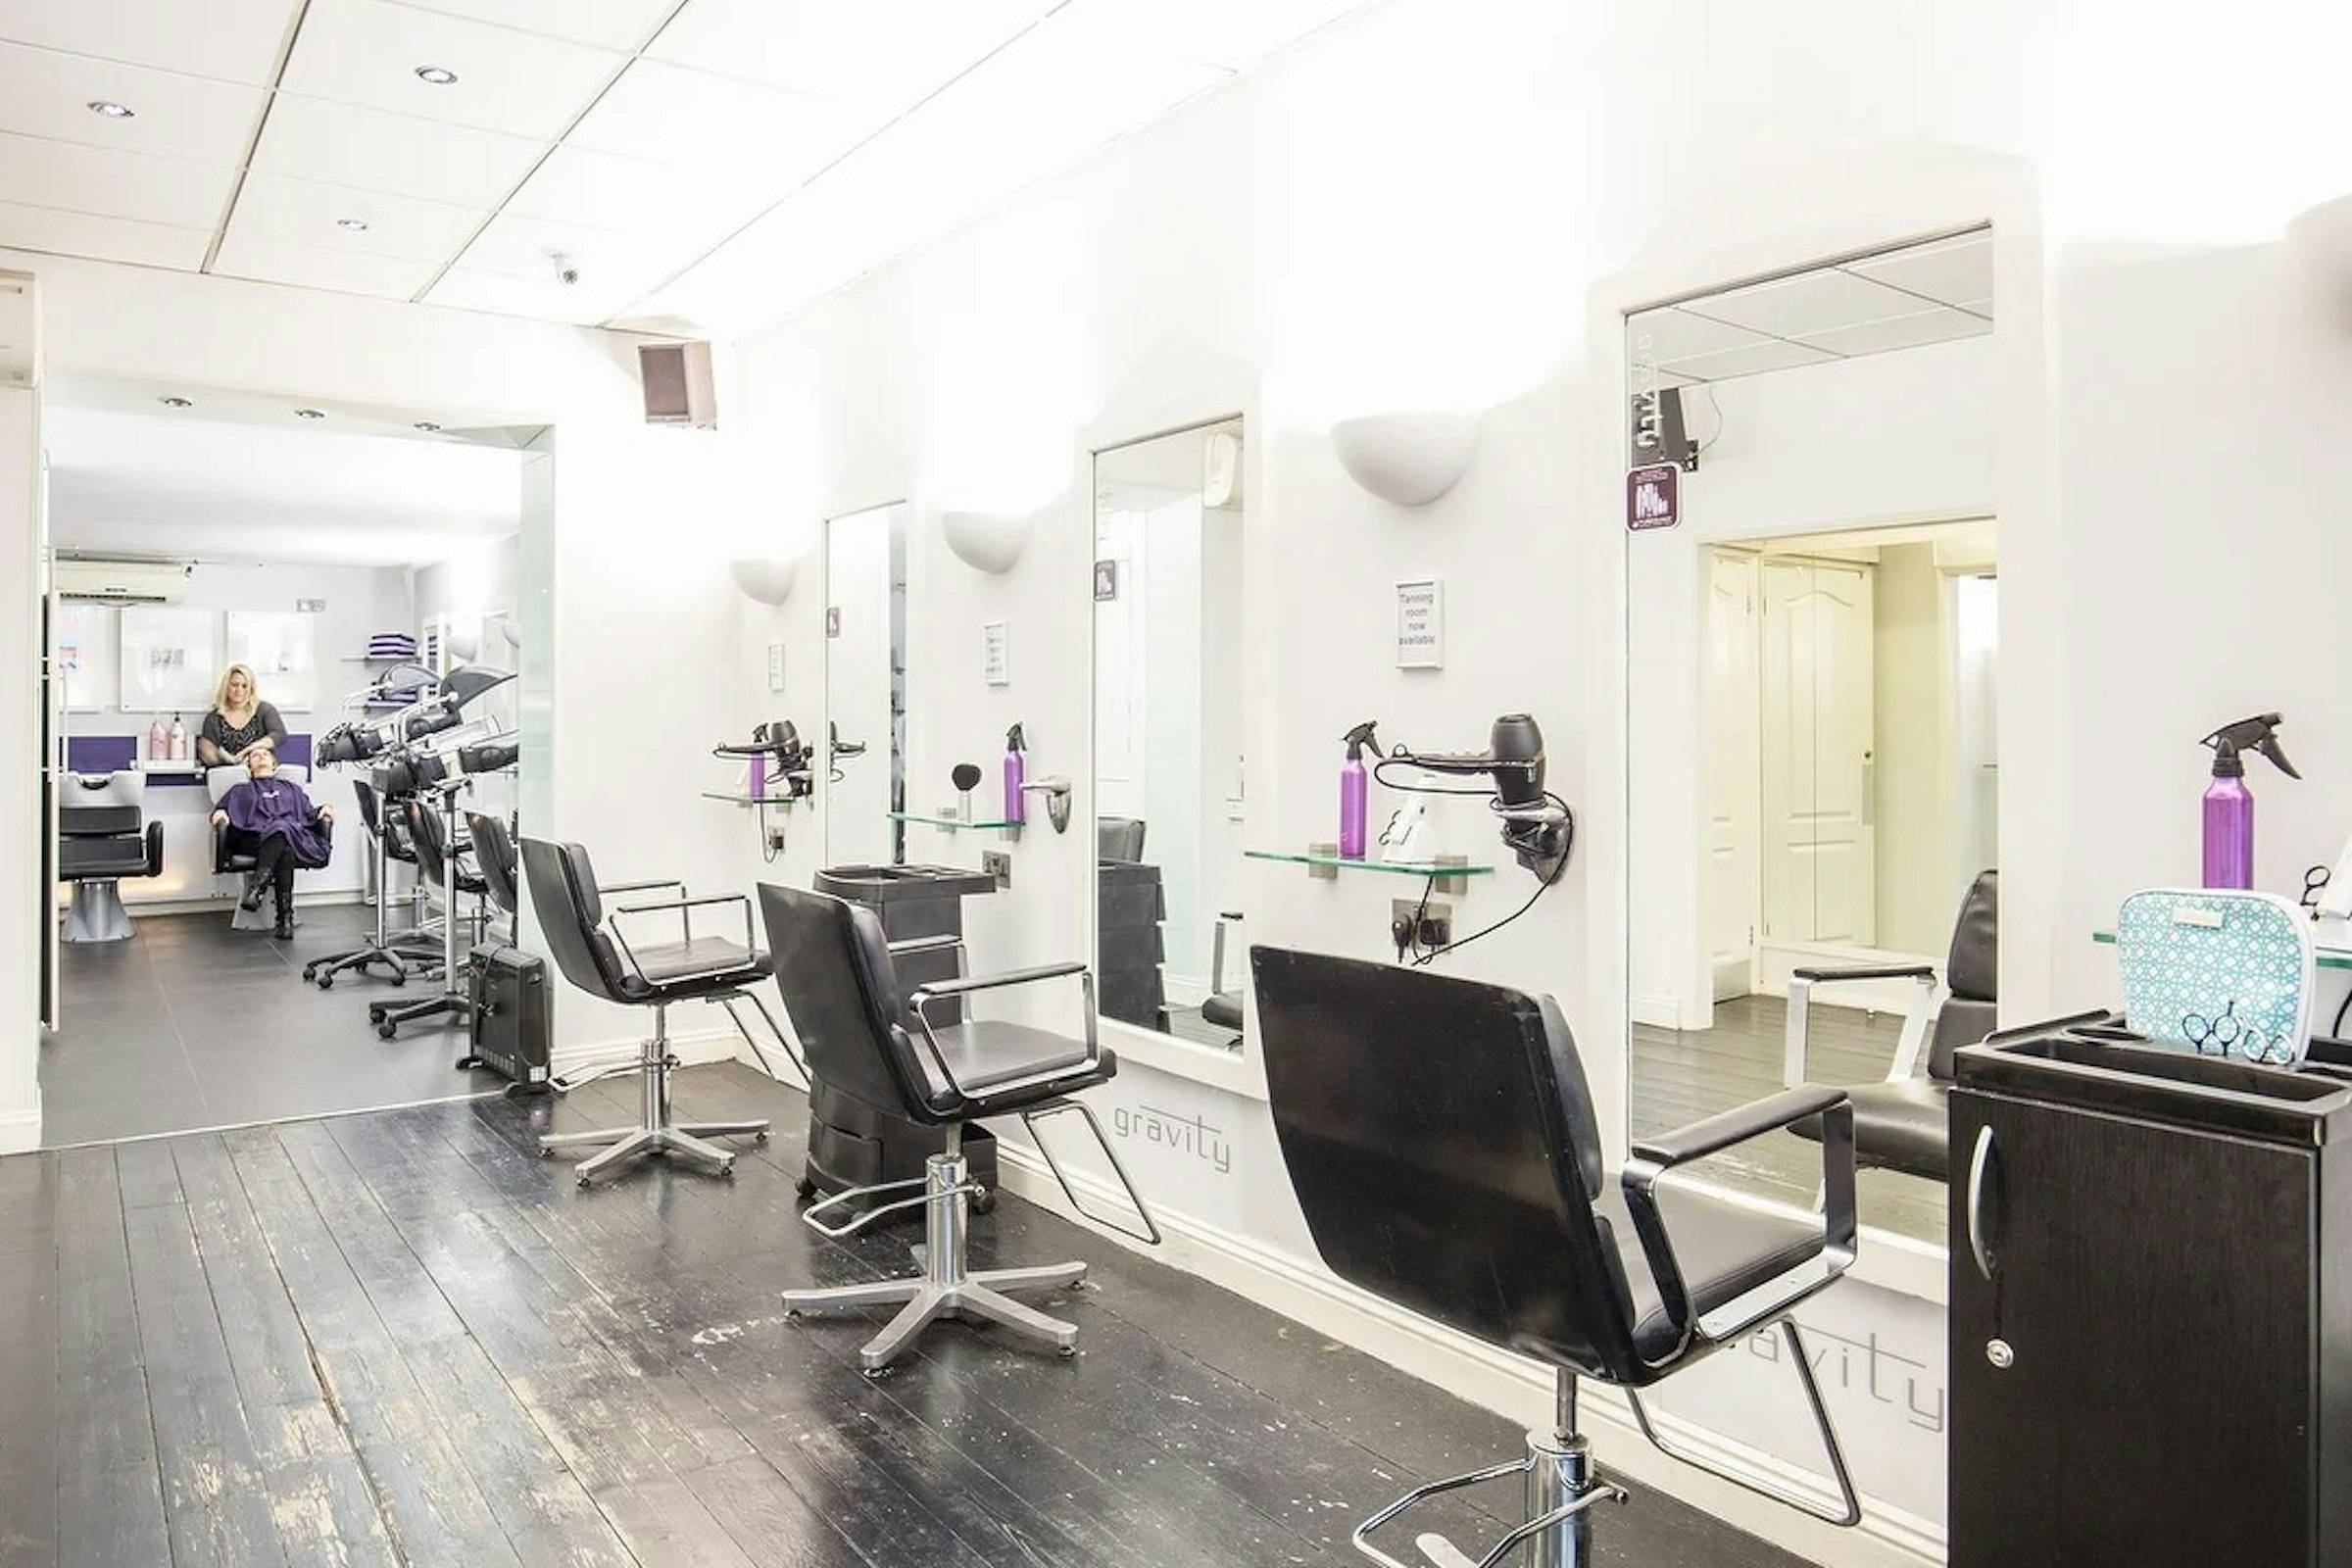 Chair to rent in London Salon